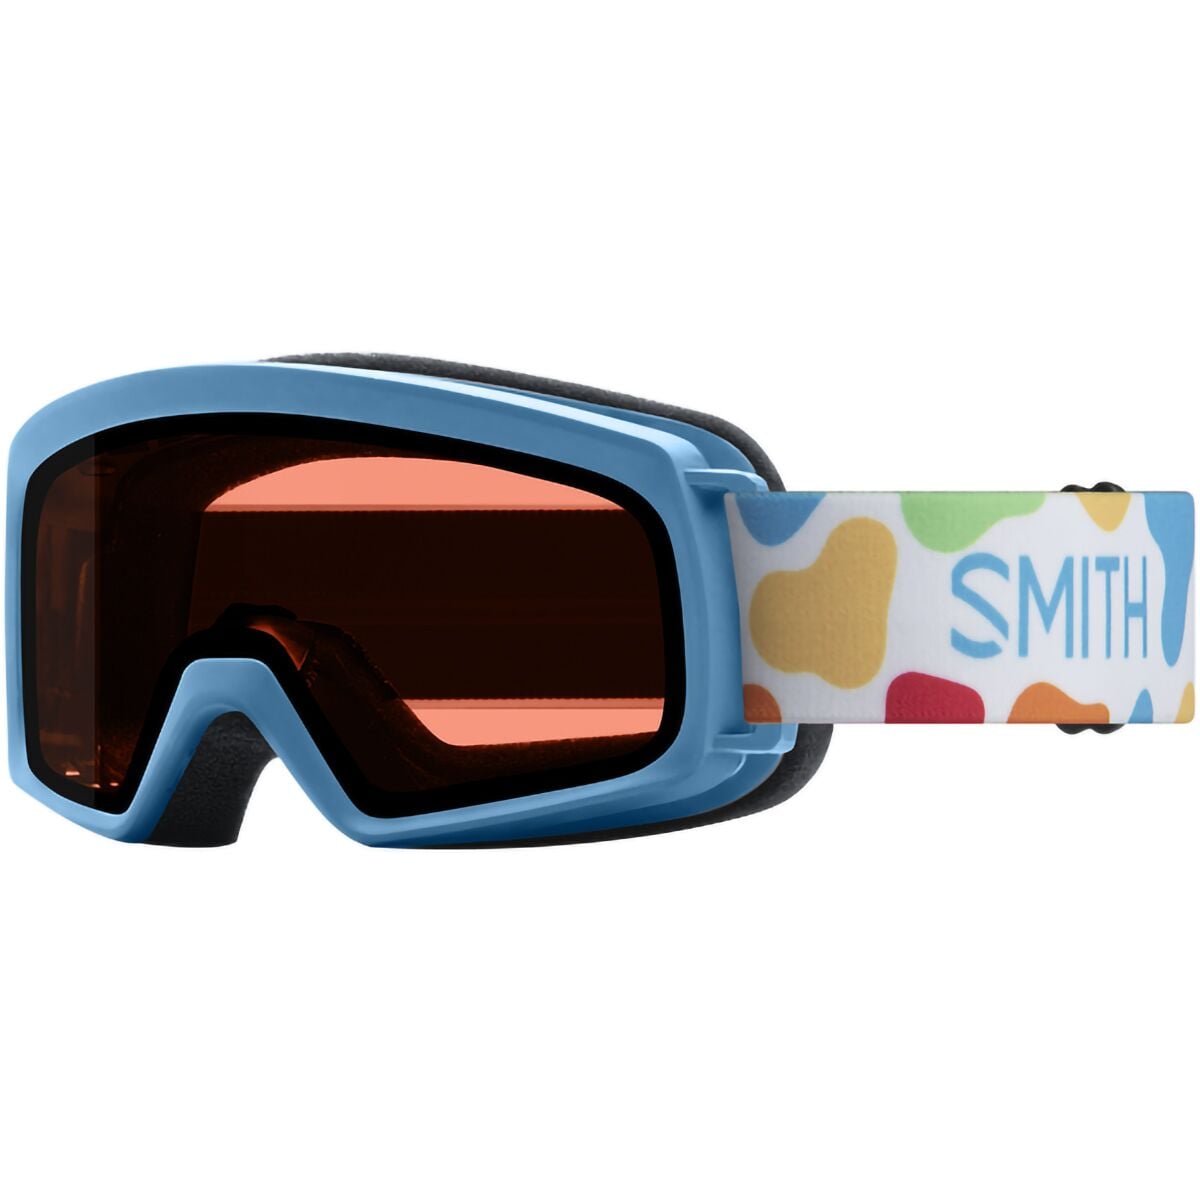 Smith Rascal Goggles - Kids' Snorkel Marker Shapes/RC36